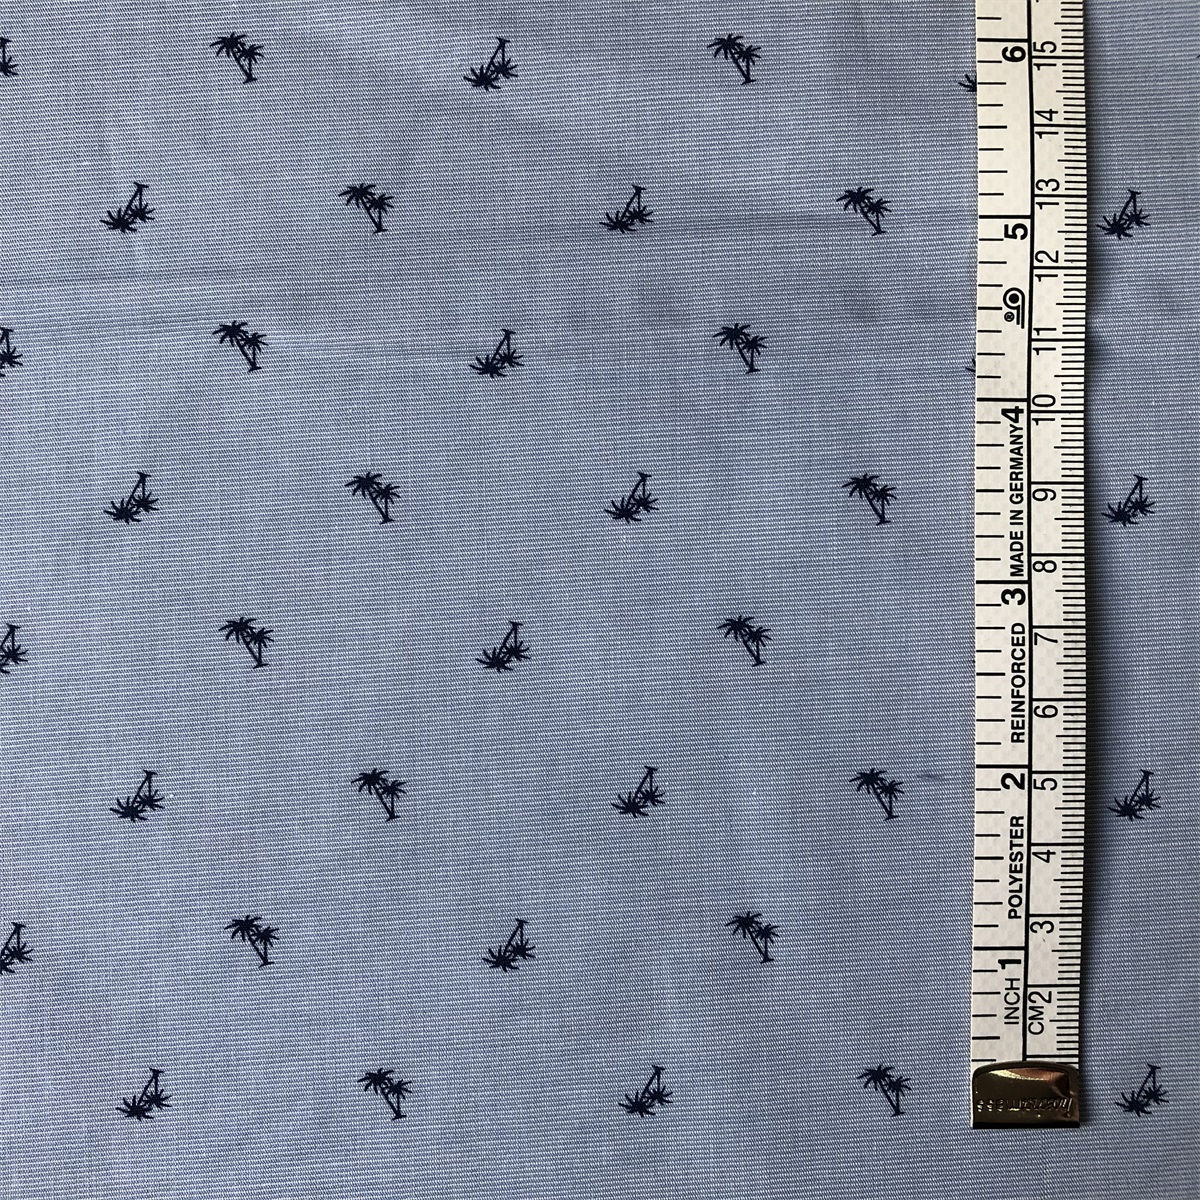 Hot sale Cotton Fabric for men's casual shirts 100% cotton printed on yarn dyed fil-a-fil plain woven shirts fabric